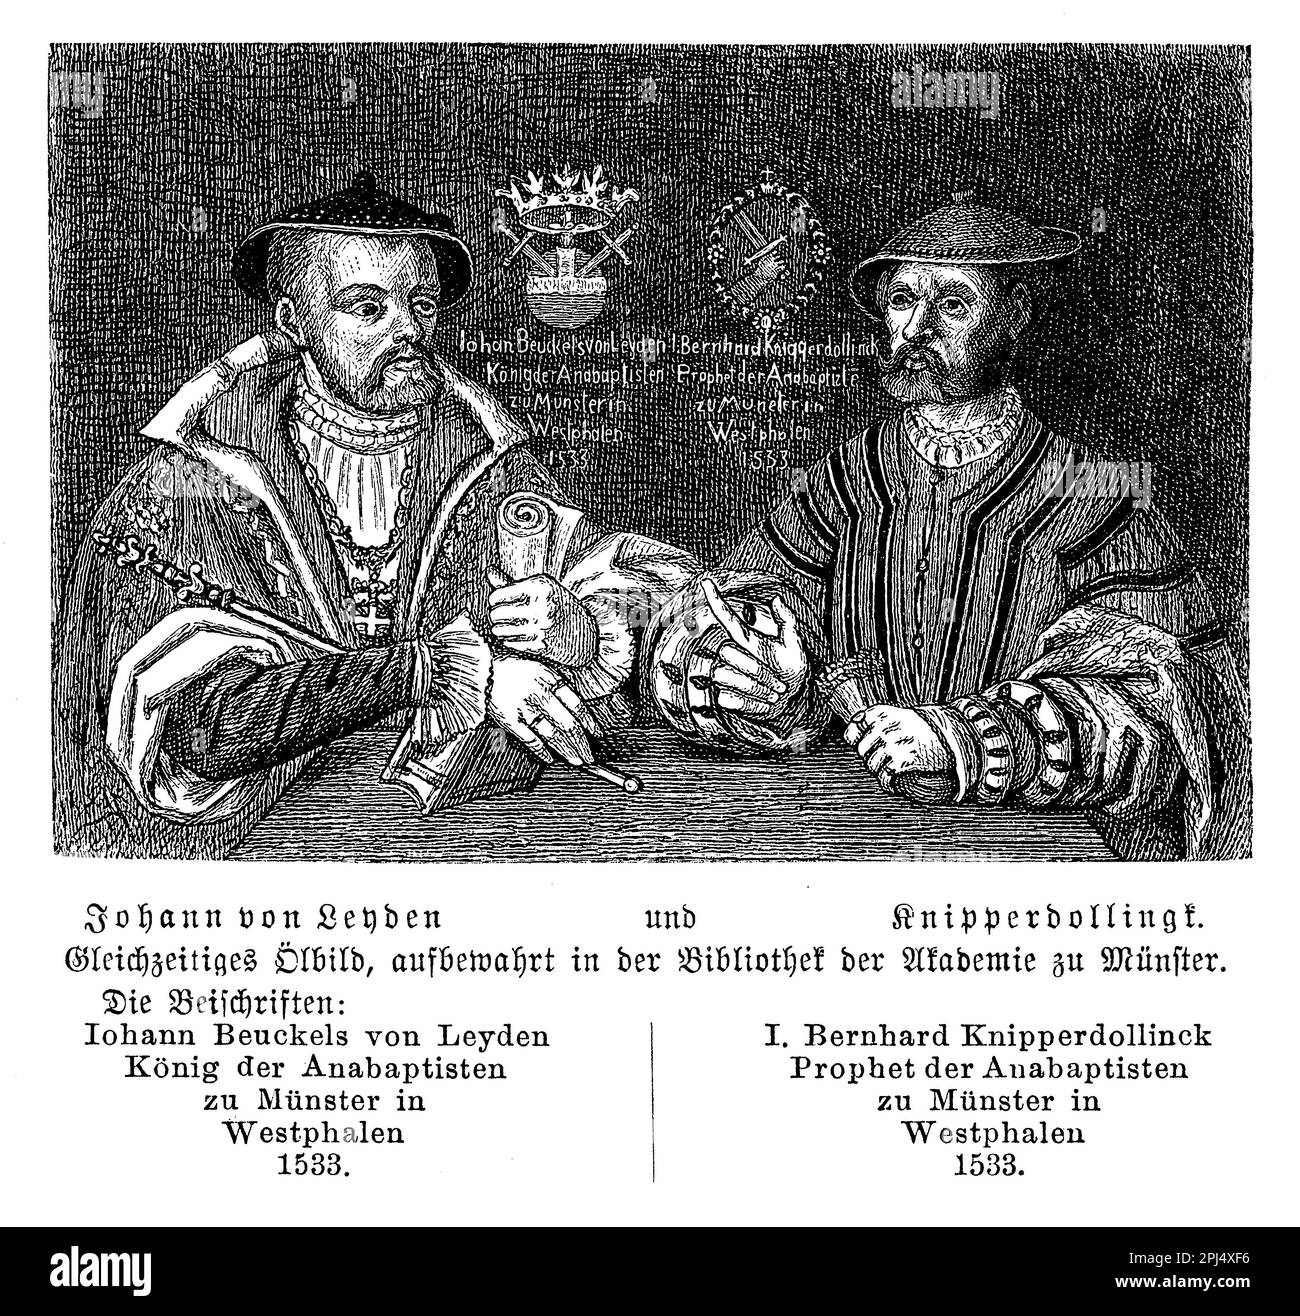 Johann von Leyden and Knipperdolling were leaders of a radical Anabaptist movement in Muenster, Germany during the 16th century. They established a theocratic state, but were eventually defeated and executed by the prince-bishop's forces. Stock Photo